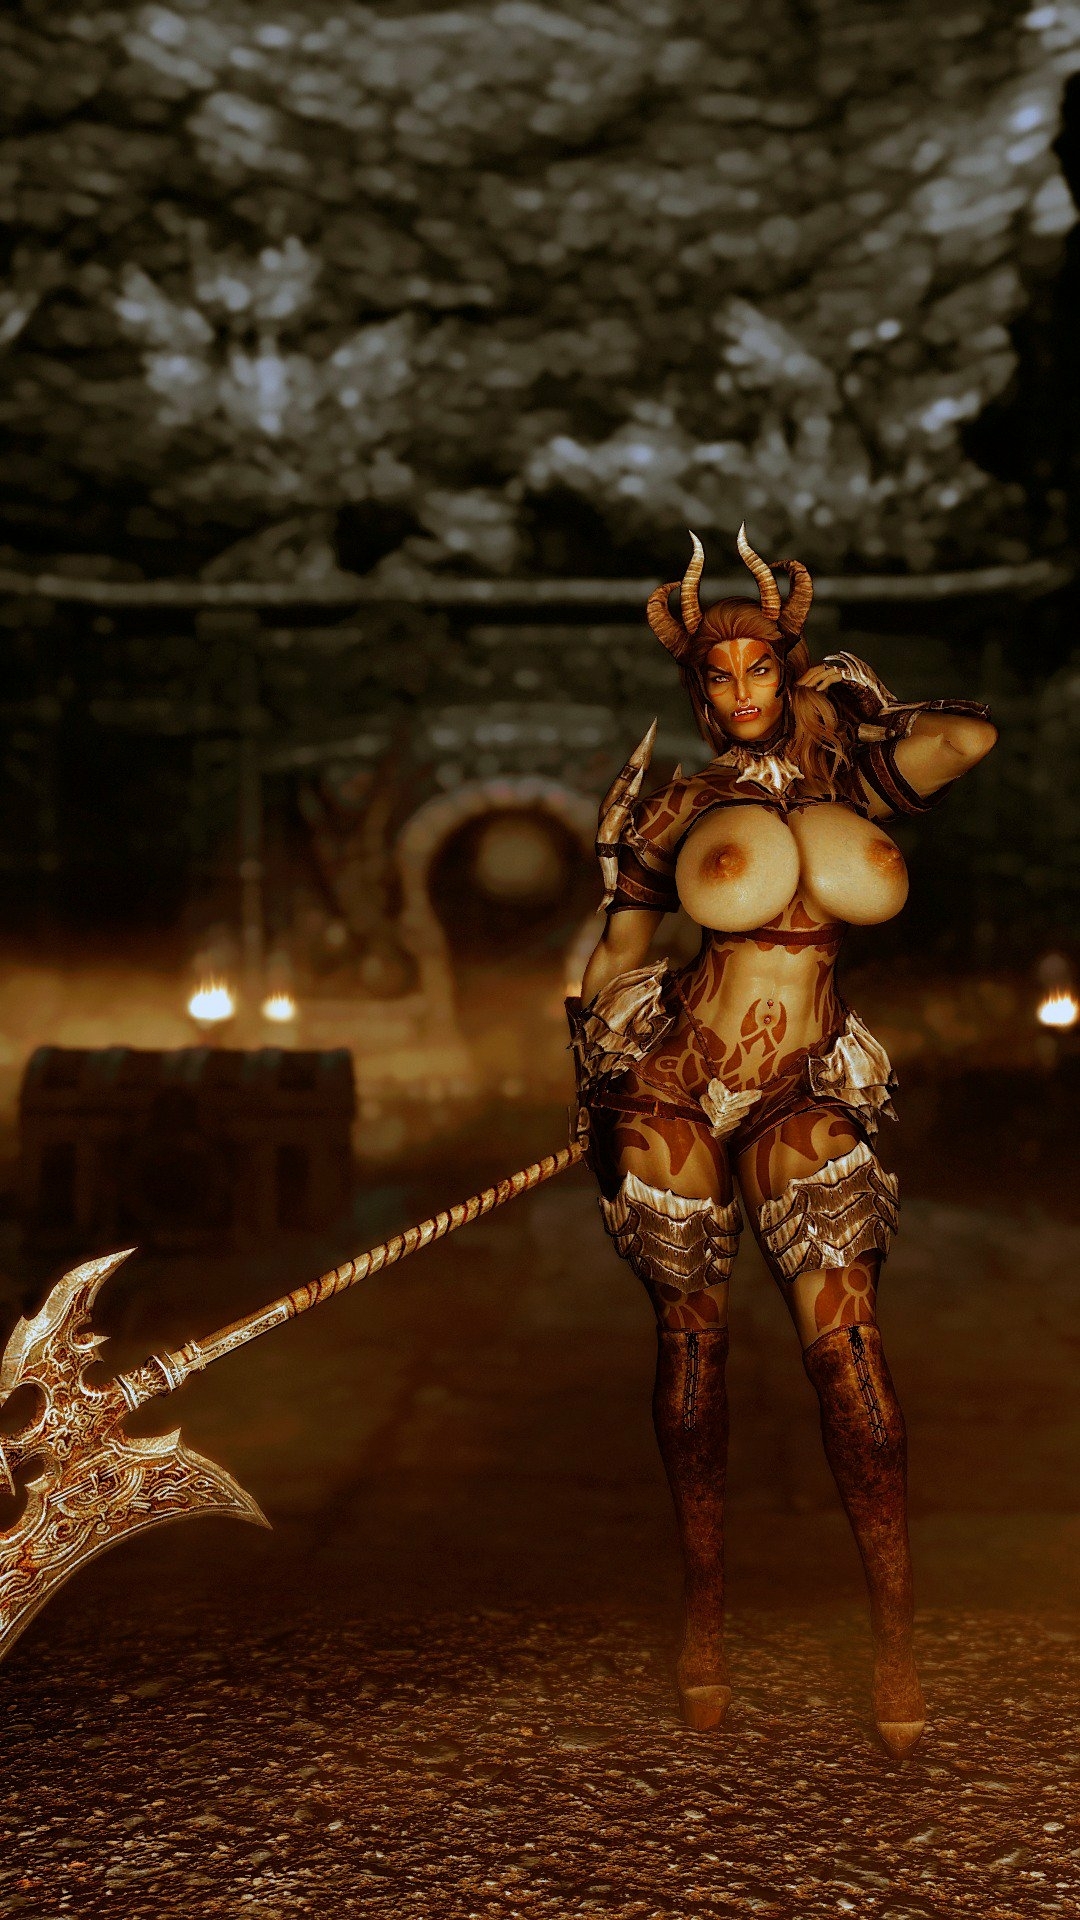 Sexy Orc with big tits - Skyrim Porn modding Skyrim 3d Porn Viking Big Tits Big Breasts Orc Monster Monstergirl Horns Demon Videogame 2